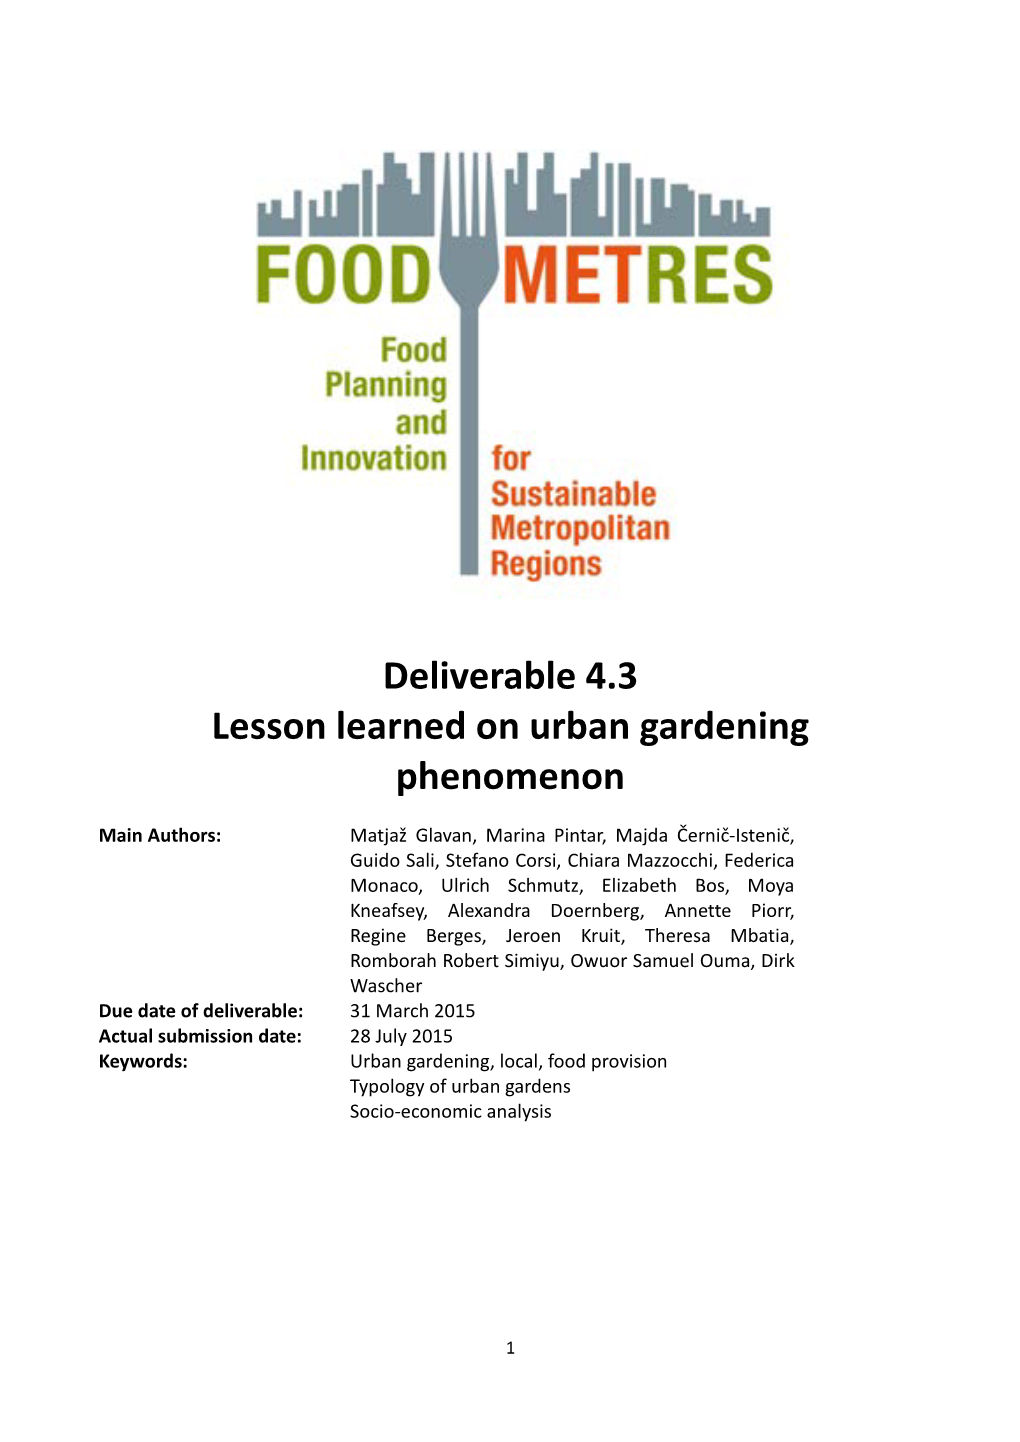 Deliverable 4.3 Lesson Learned on Urban Gardening Phenomenon